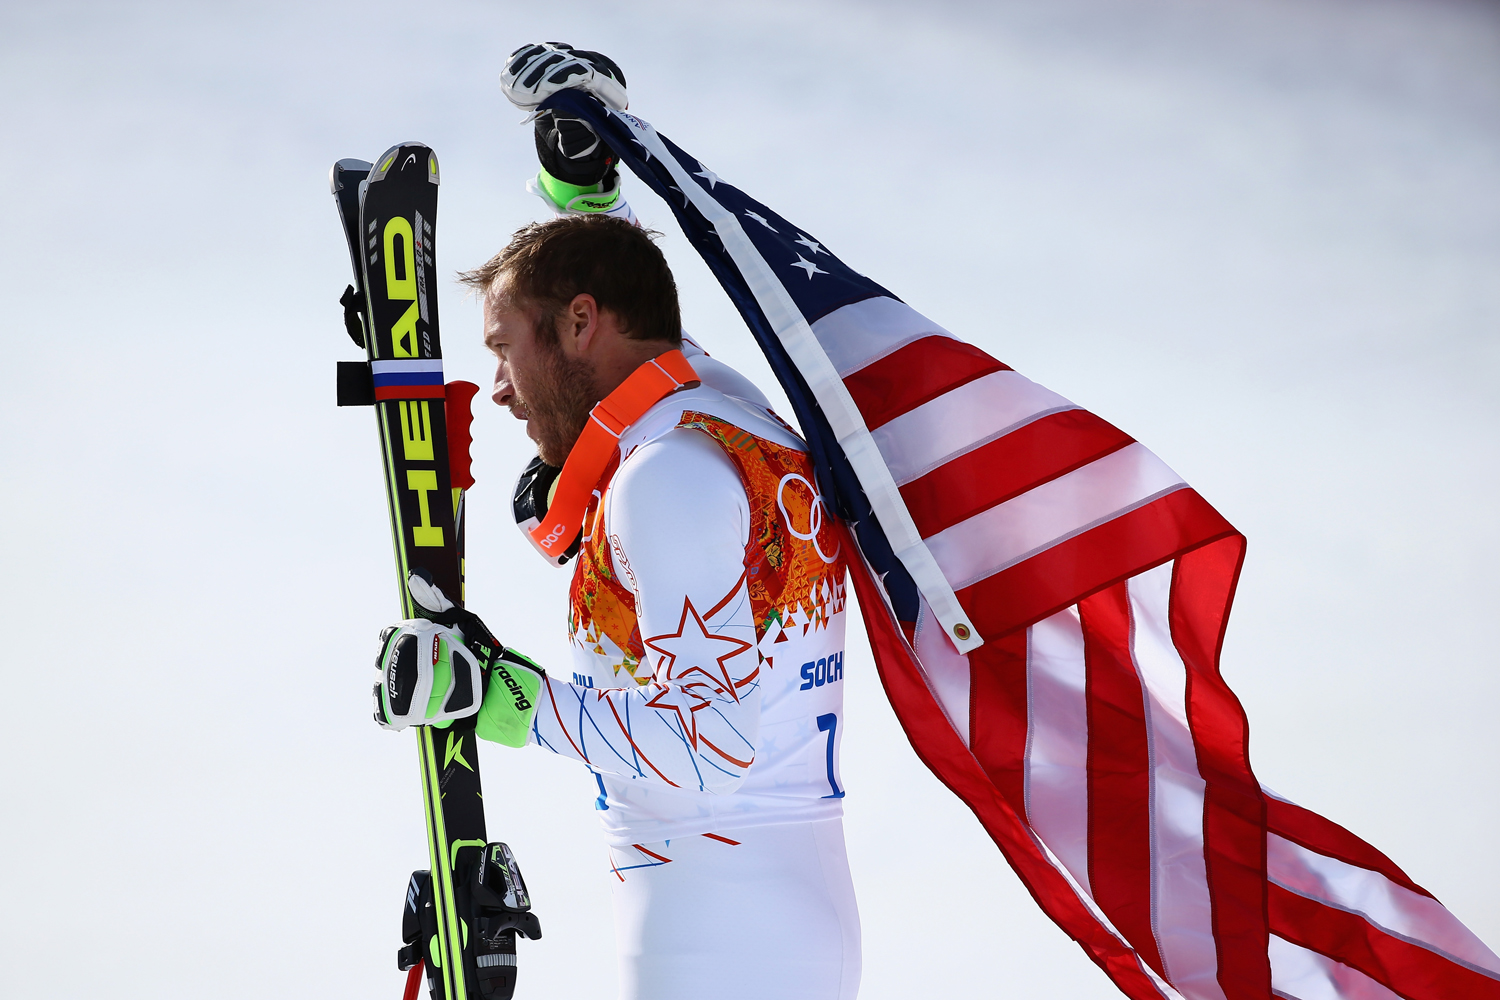 Bronze medalist Bode Miller of the United States reacts during the flower ceremony for the Alpine Skiing Men's Super-G during the Sochi 2014 Winter Olympics at Rosa Khutor Alpine Center on Feb. 16, 2014 in Sochi, Russia.